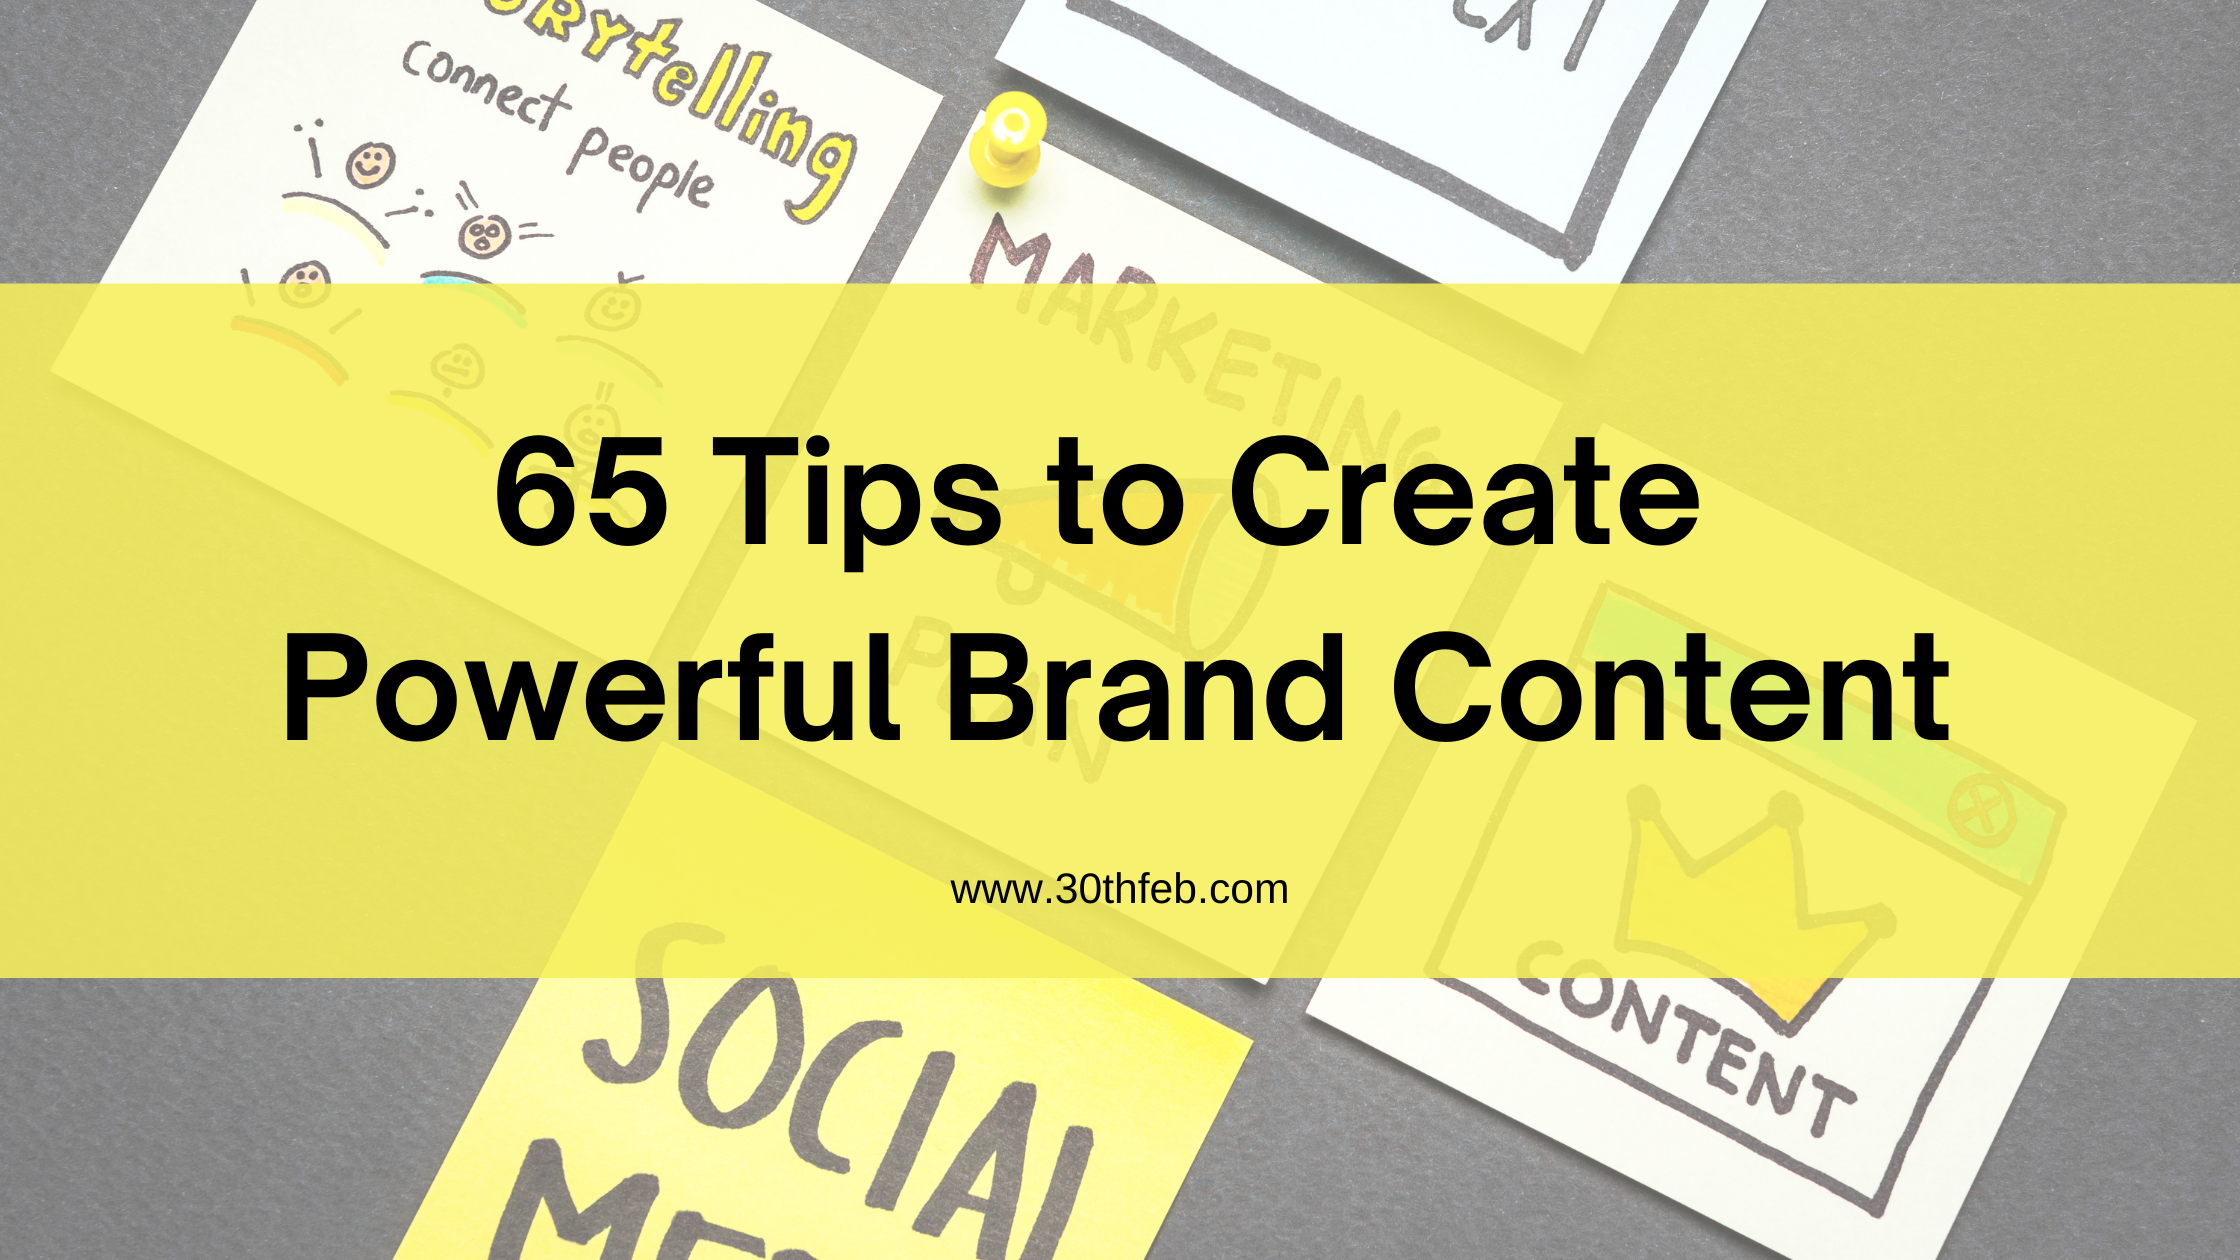 65 Tips to Create Powerful Brand Content